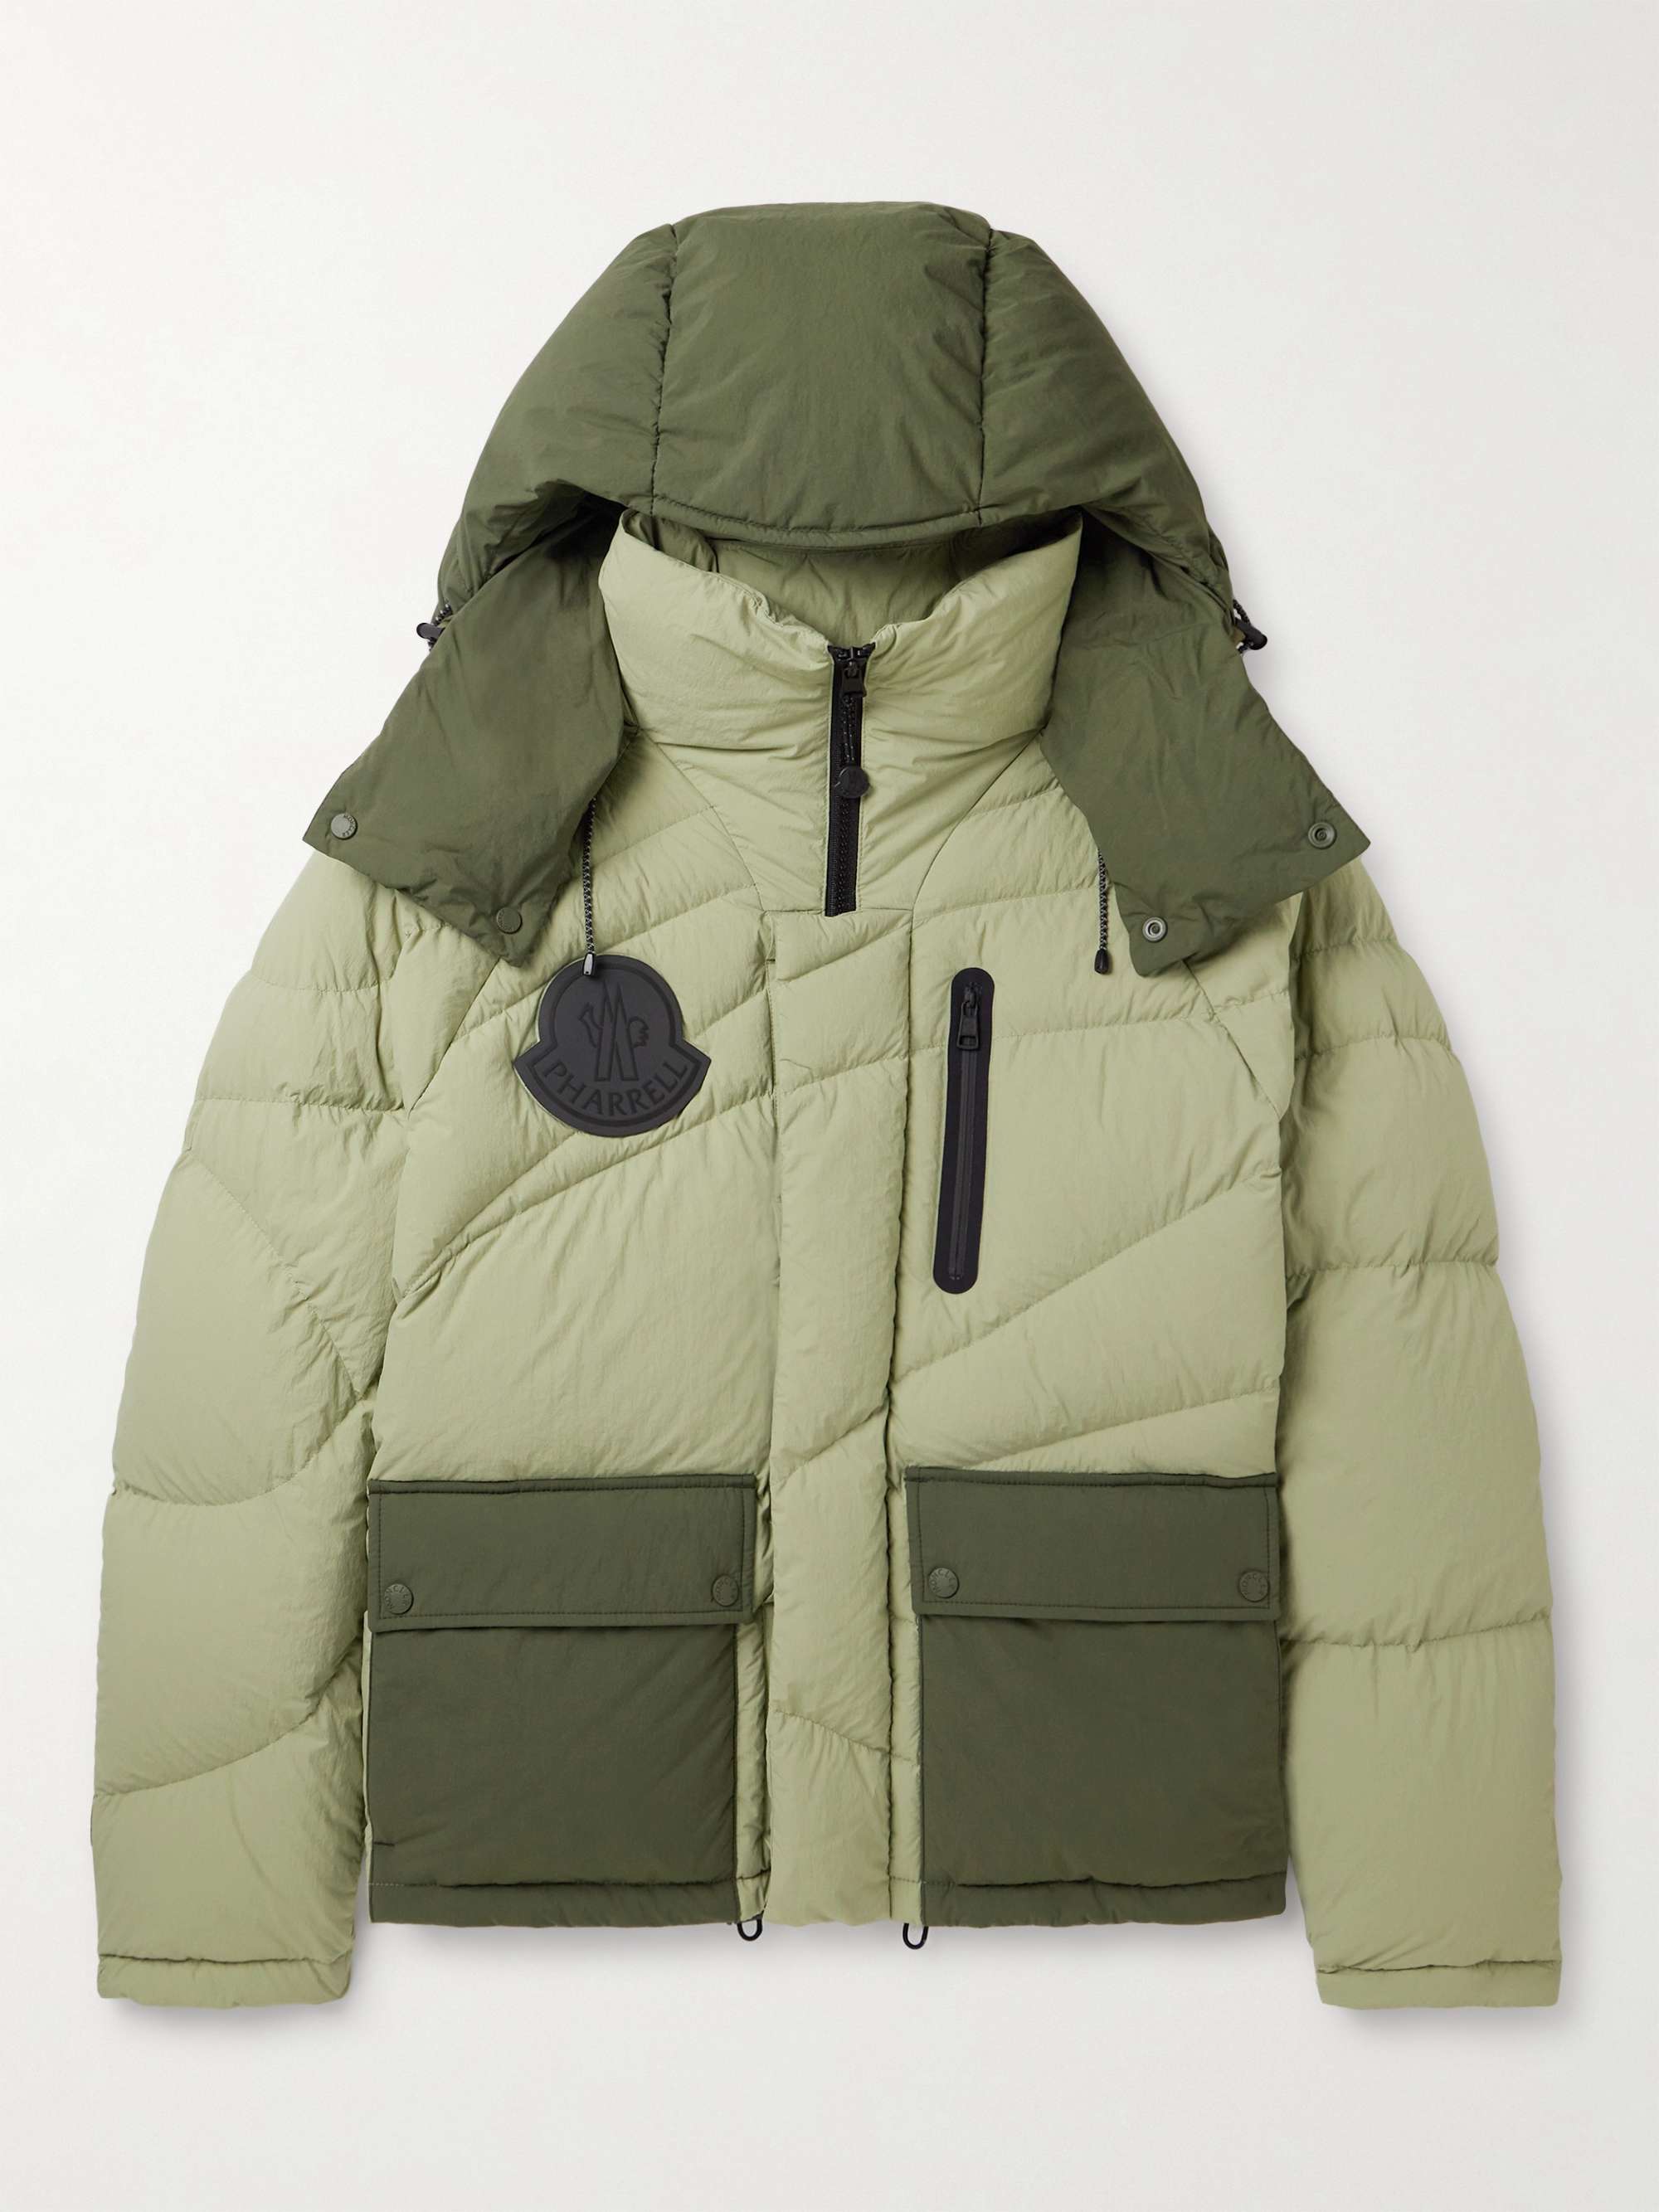 MONCLER GENIUS + Pharrell Williams Two-Tone Quilted Shell Hooded